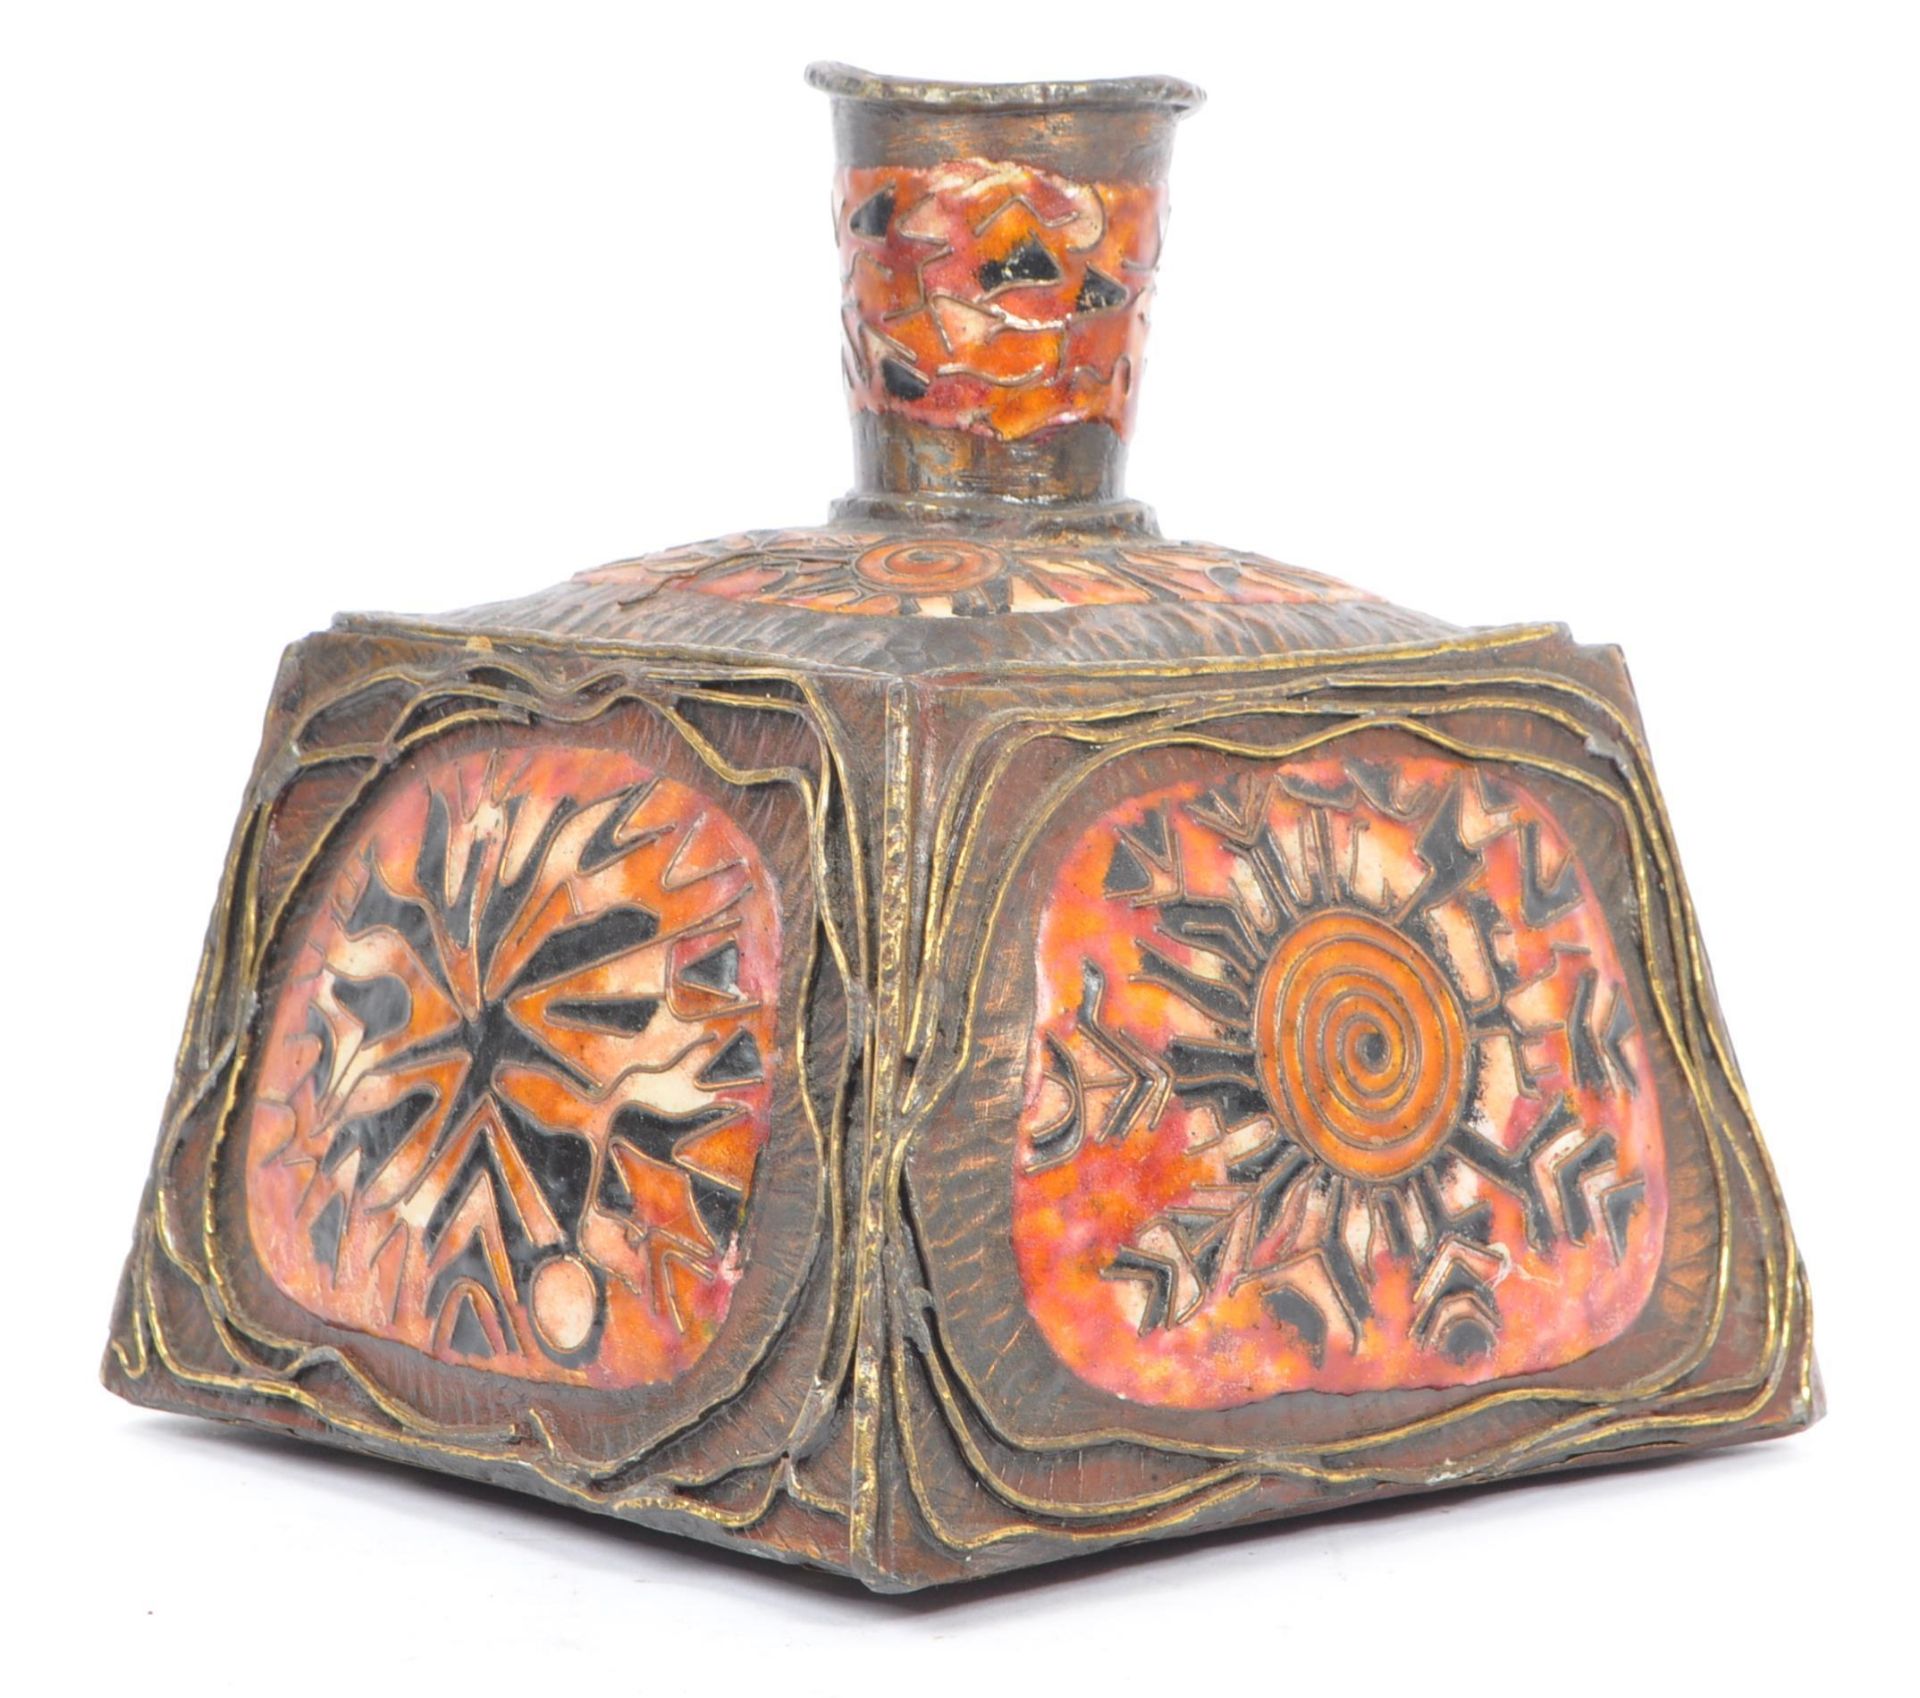 EARLY 20TH CENTURY MIDDLE EASTERN ENAMELLED BRASS VASE